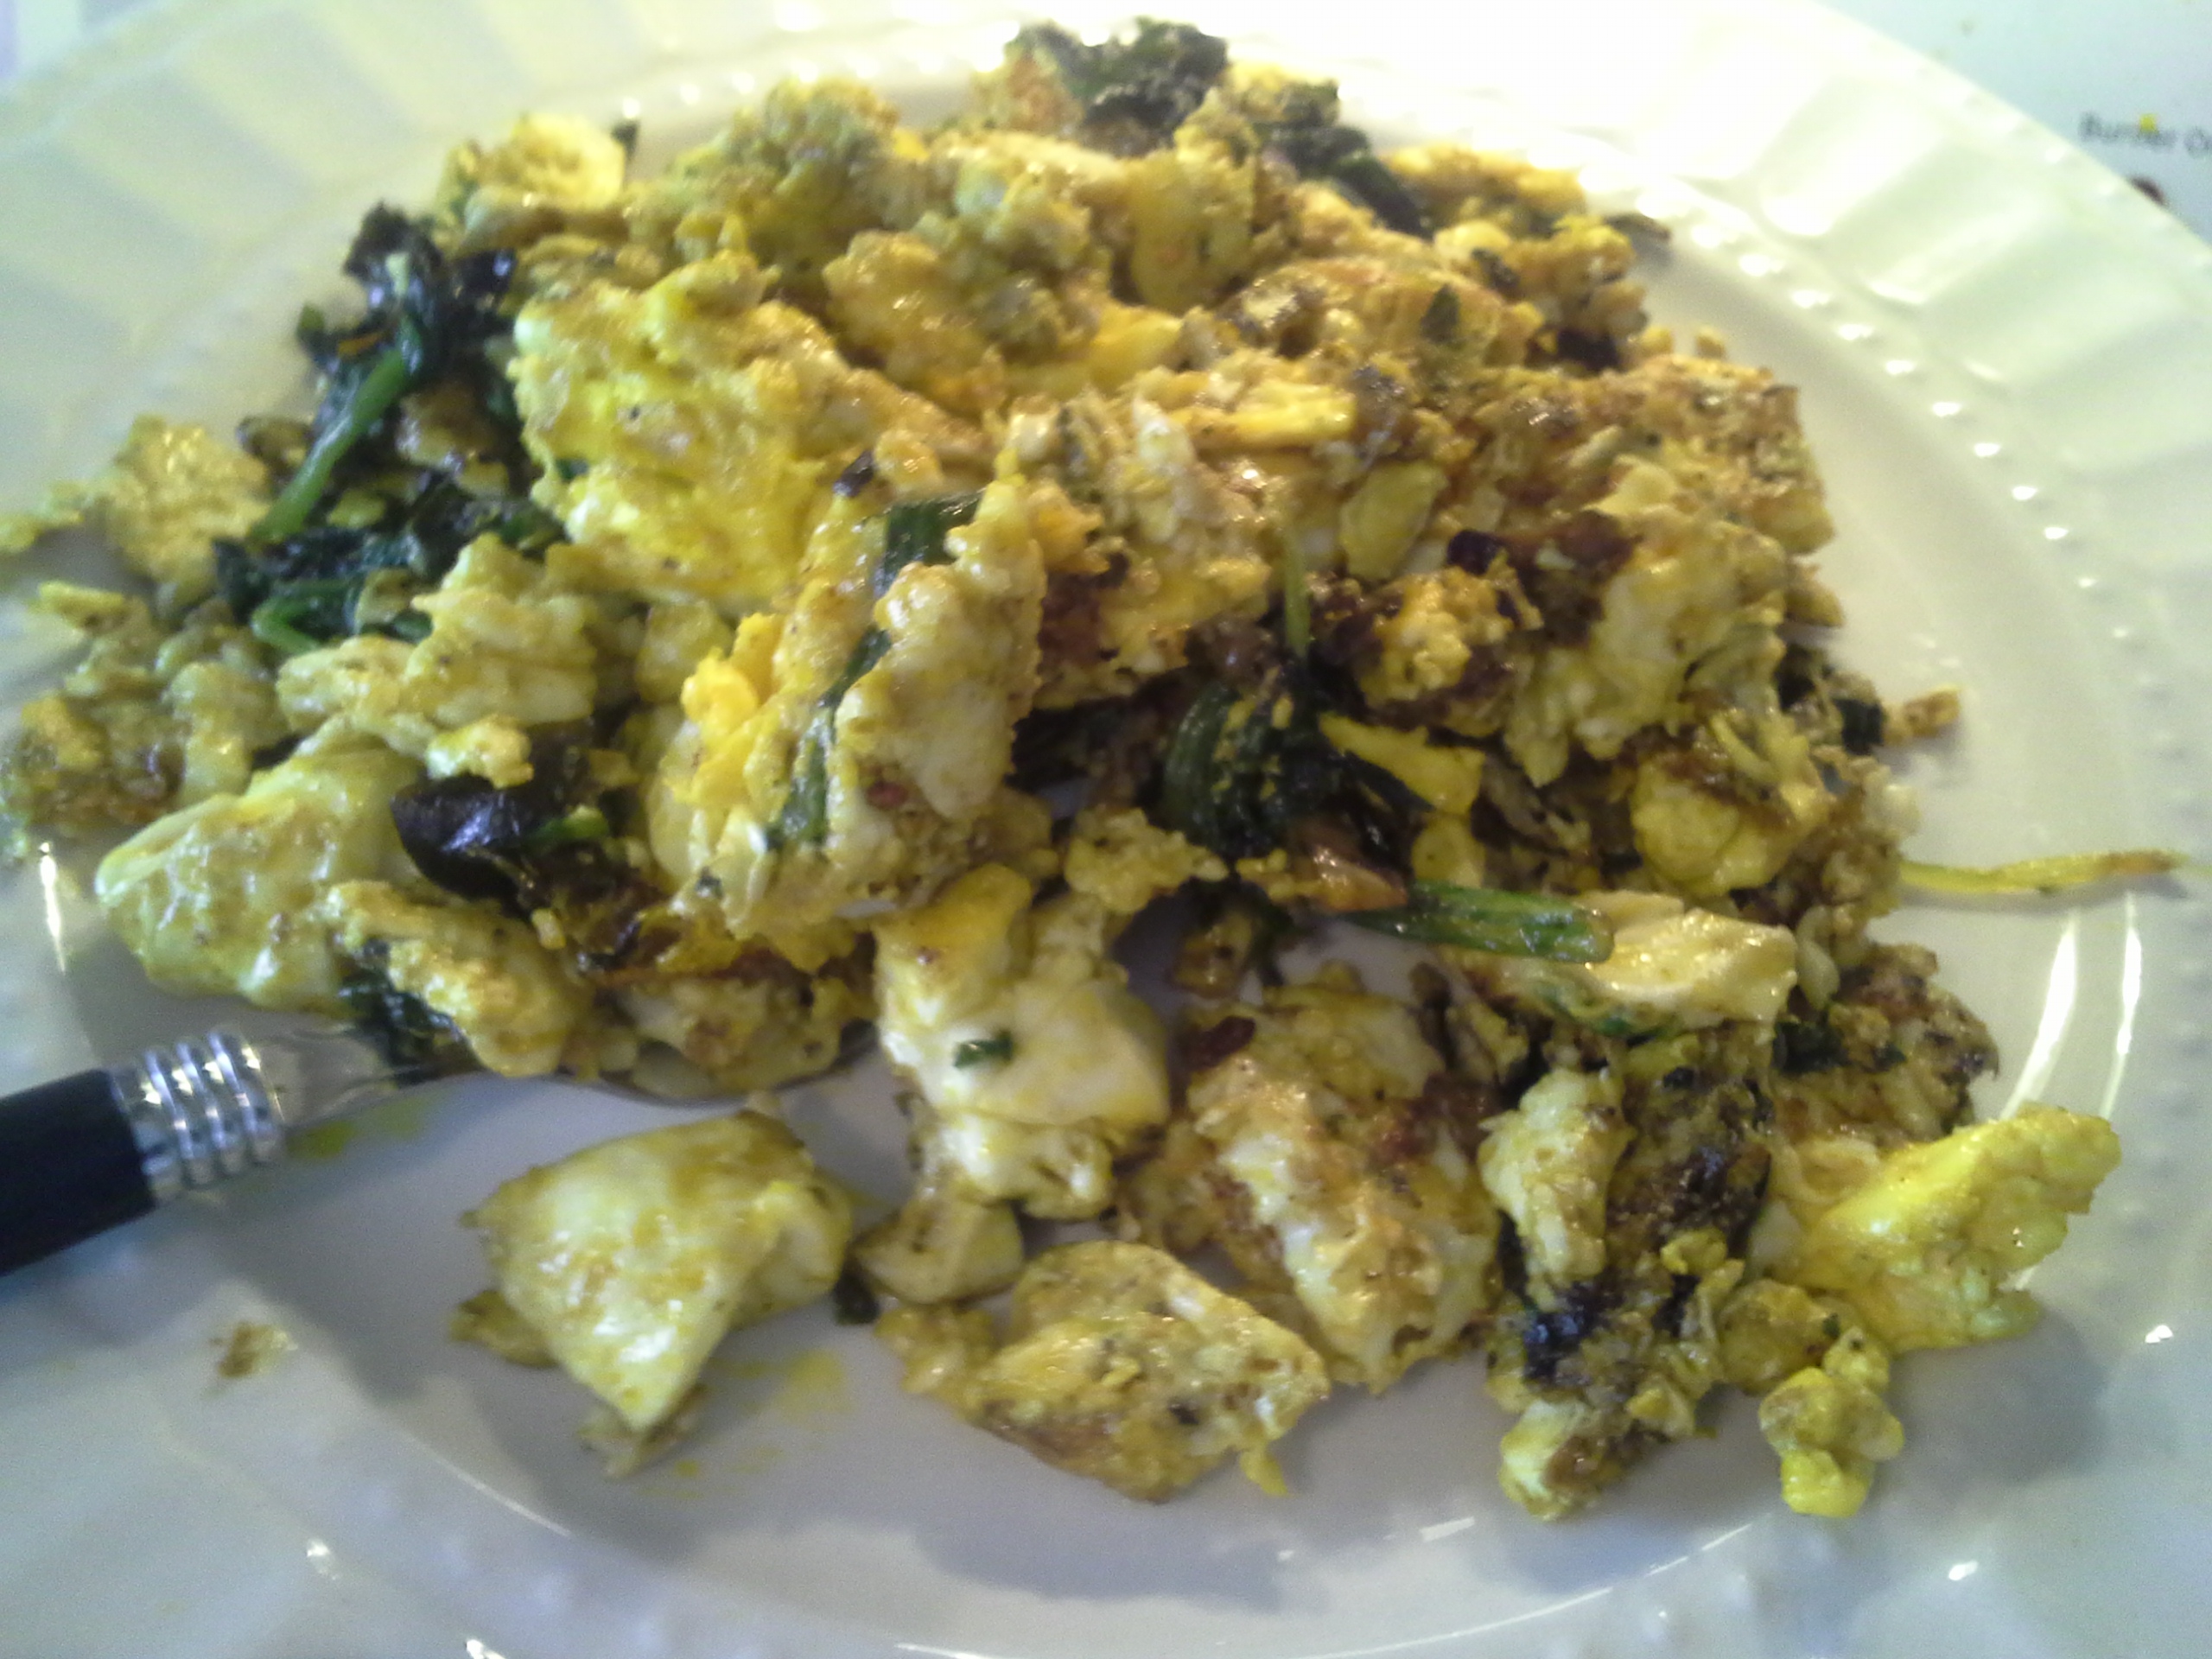 Breakfast: 11:10 a.m. | 4 eggs, greens mix, 2 Tbsp. red palm oil, herbs & spices